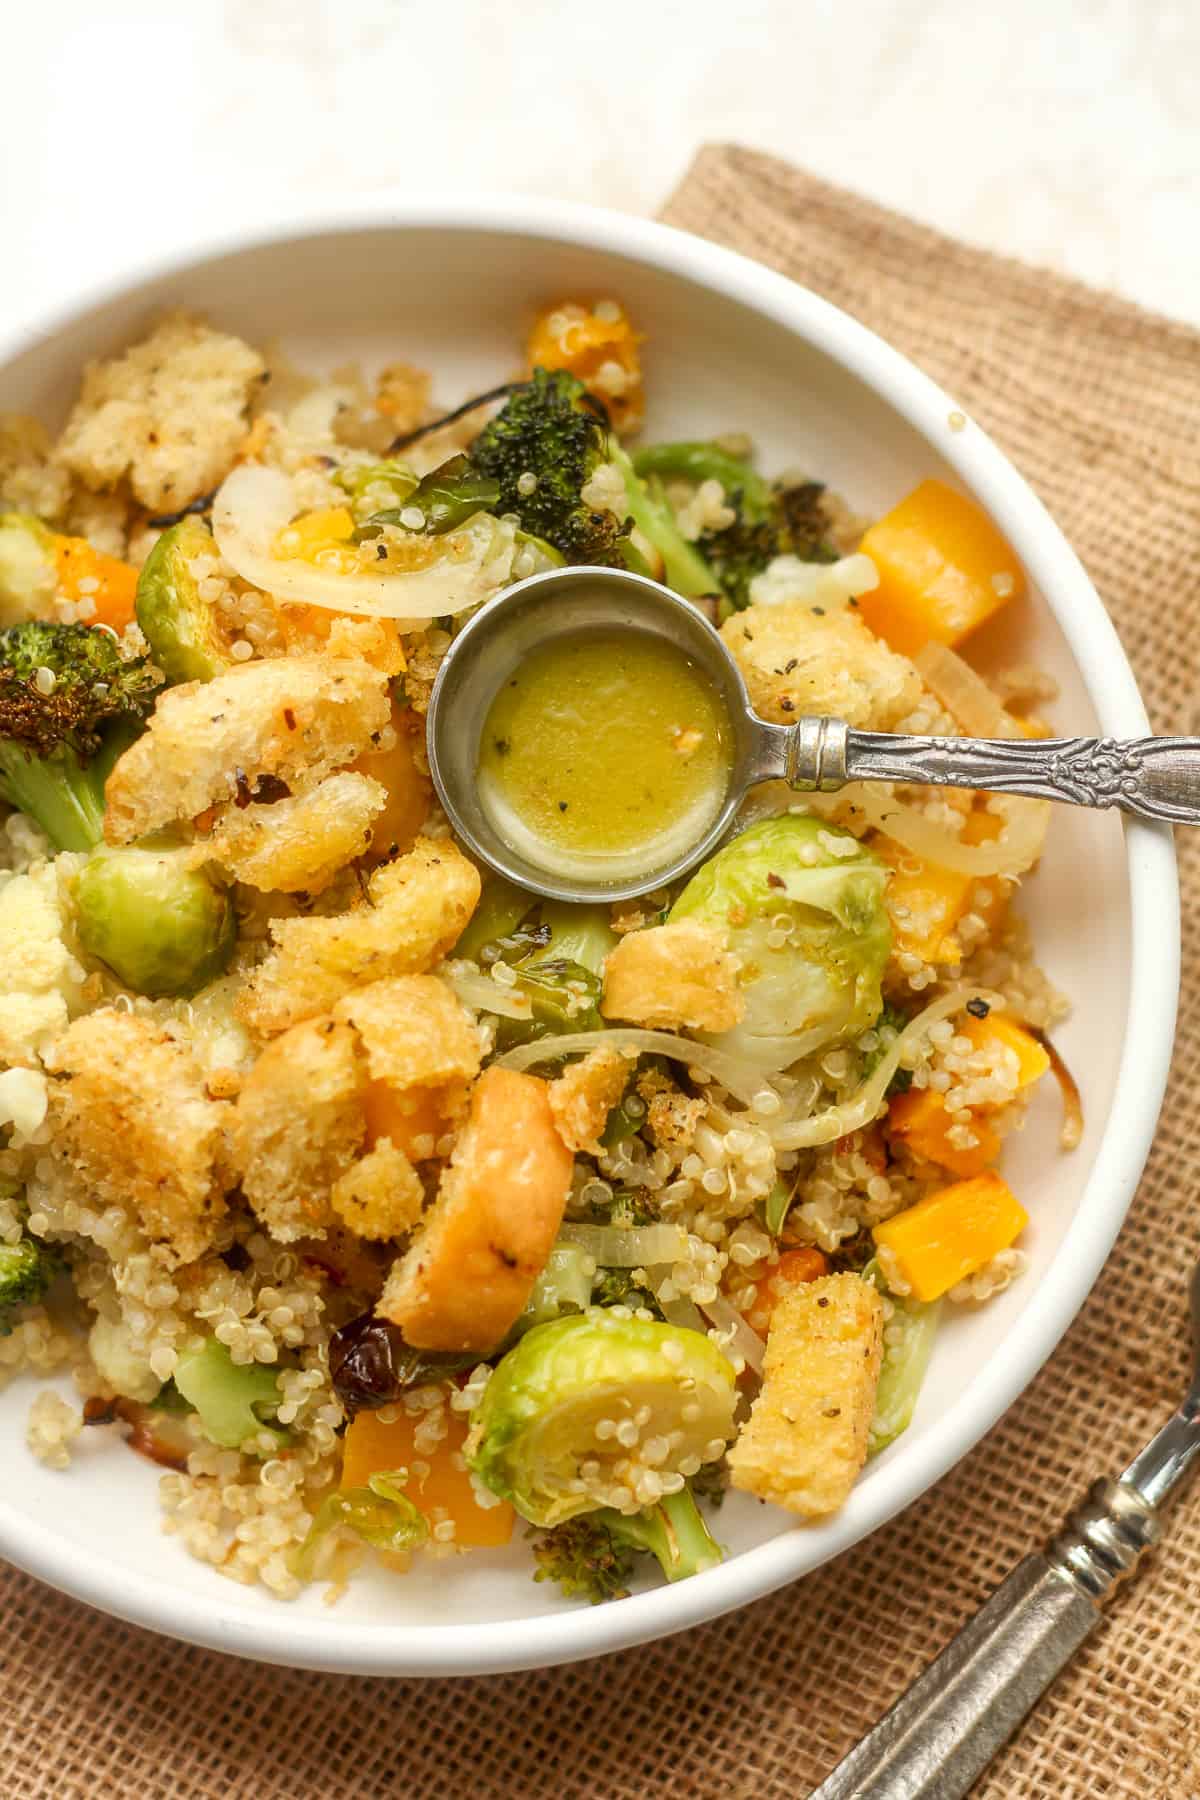 Closeup on a serving of roasted vegetable quinoa salad with a tablespoon of lemon dressing.